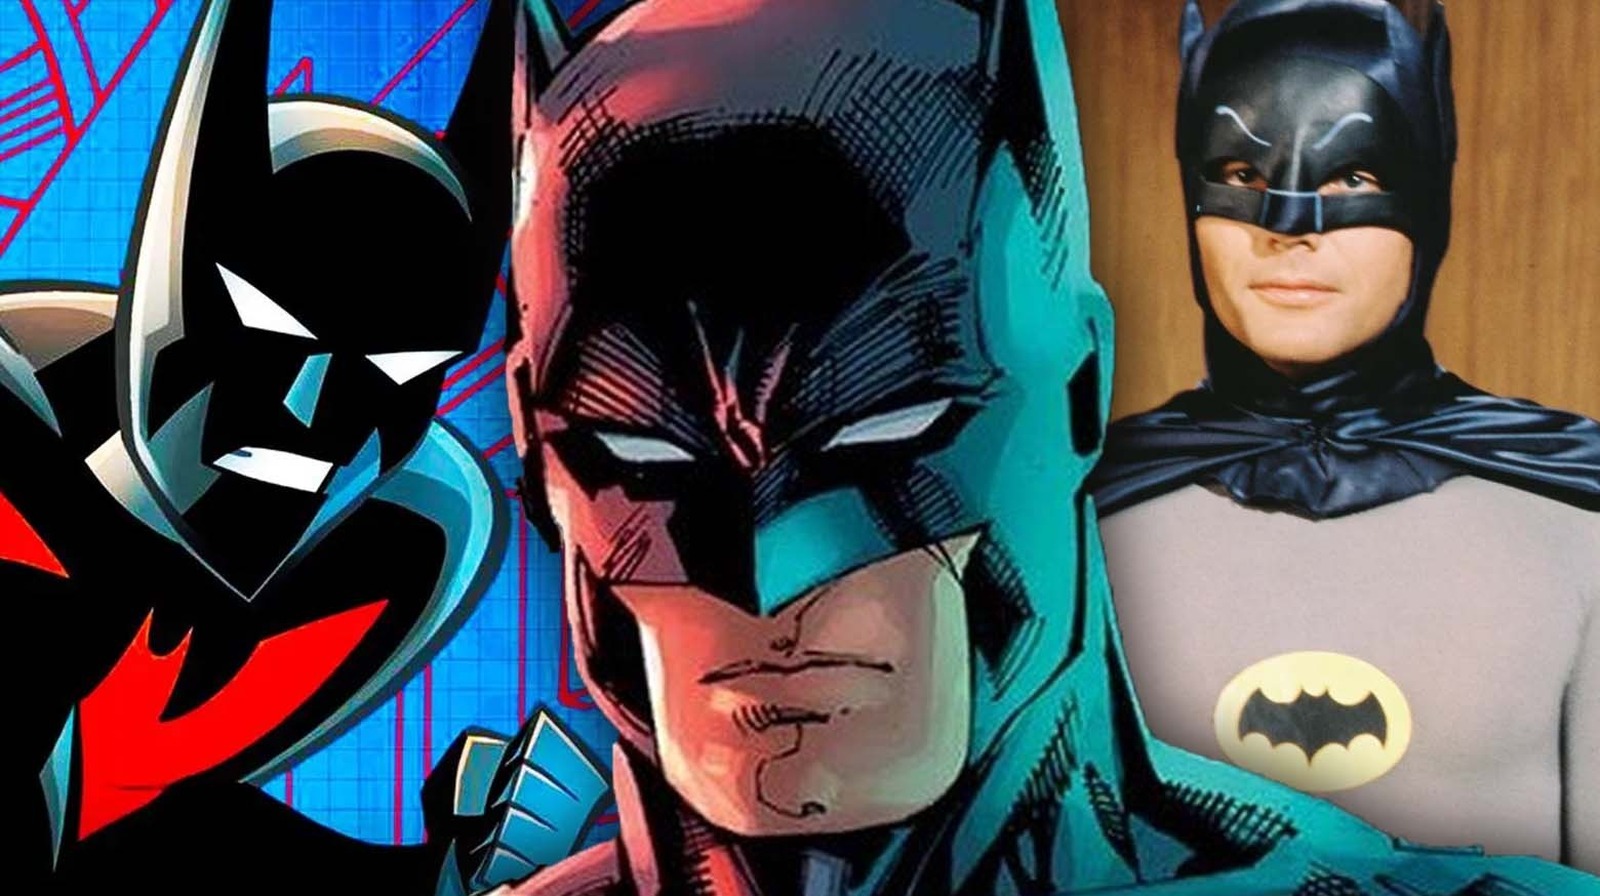 Batman Enters The Bat-Verse And Meets Several Iconic Caped Crusaders